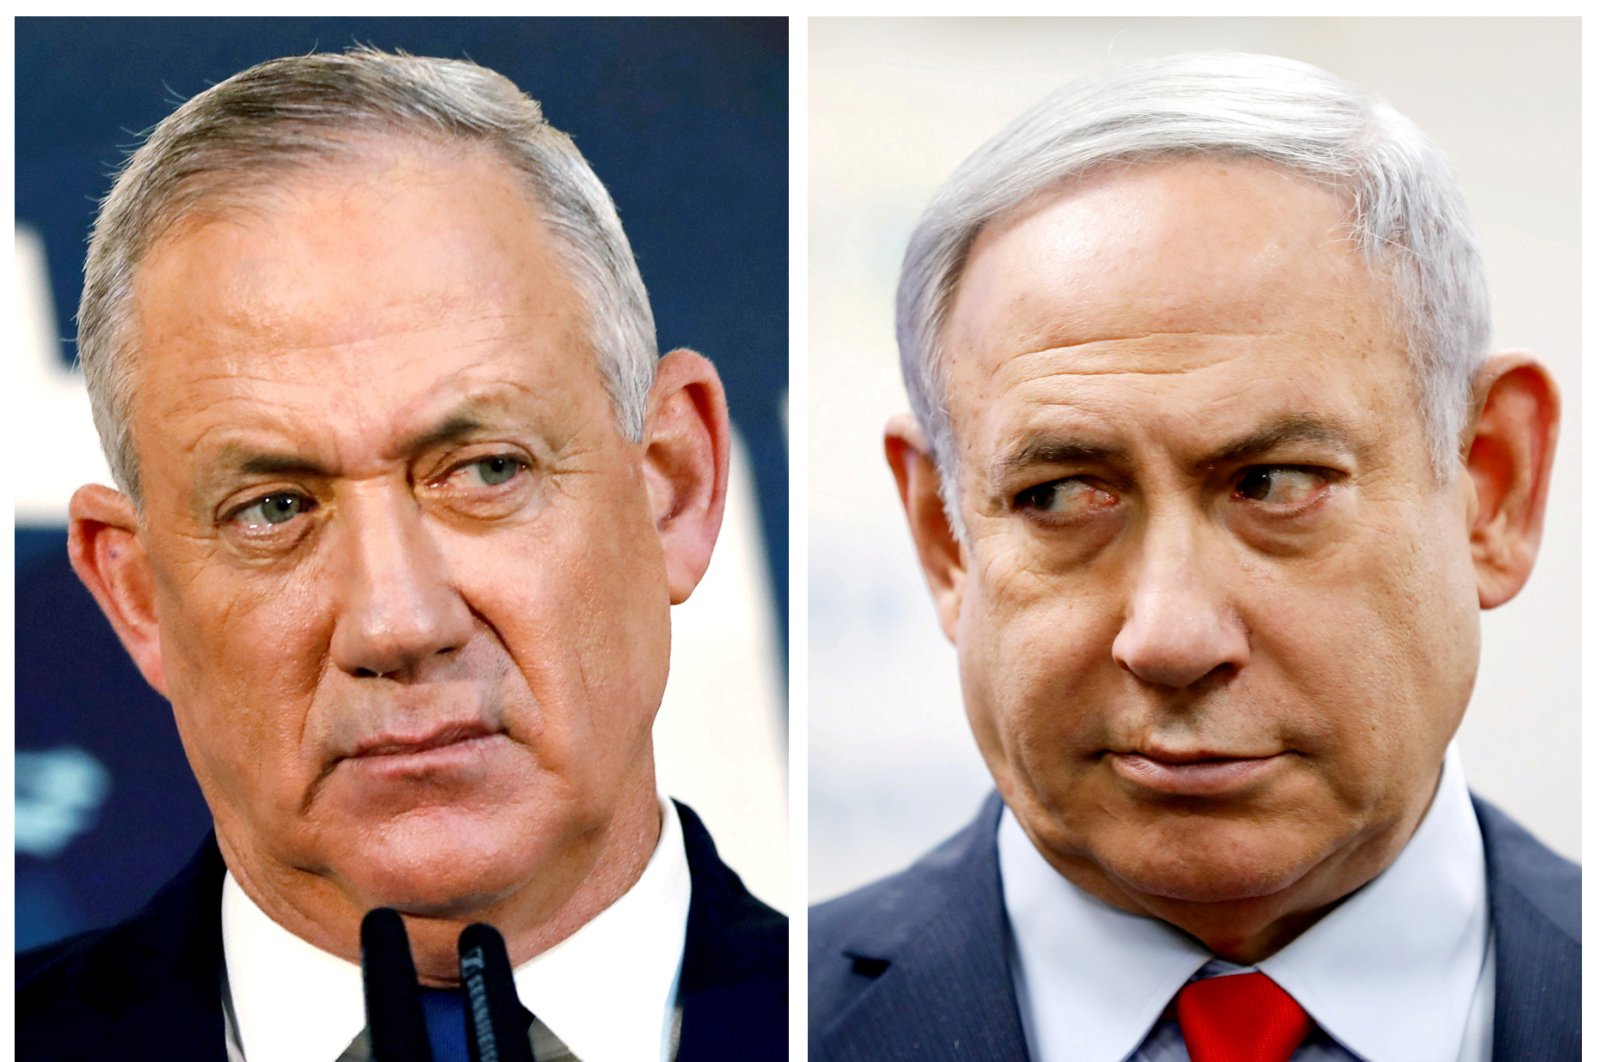 A combination picture shows Benny Gantz, leader of Blue and White party, in Tel Aviv, Nov. 23, 2019 and Israeli Prime Minister Benjamin Netanyahu in Kiryat Malachi, March 1, 2020. (REUTERS Photo)